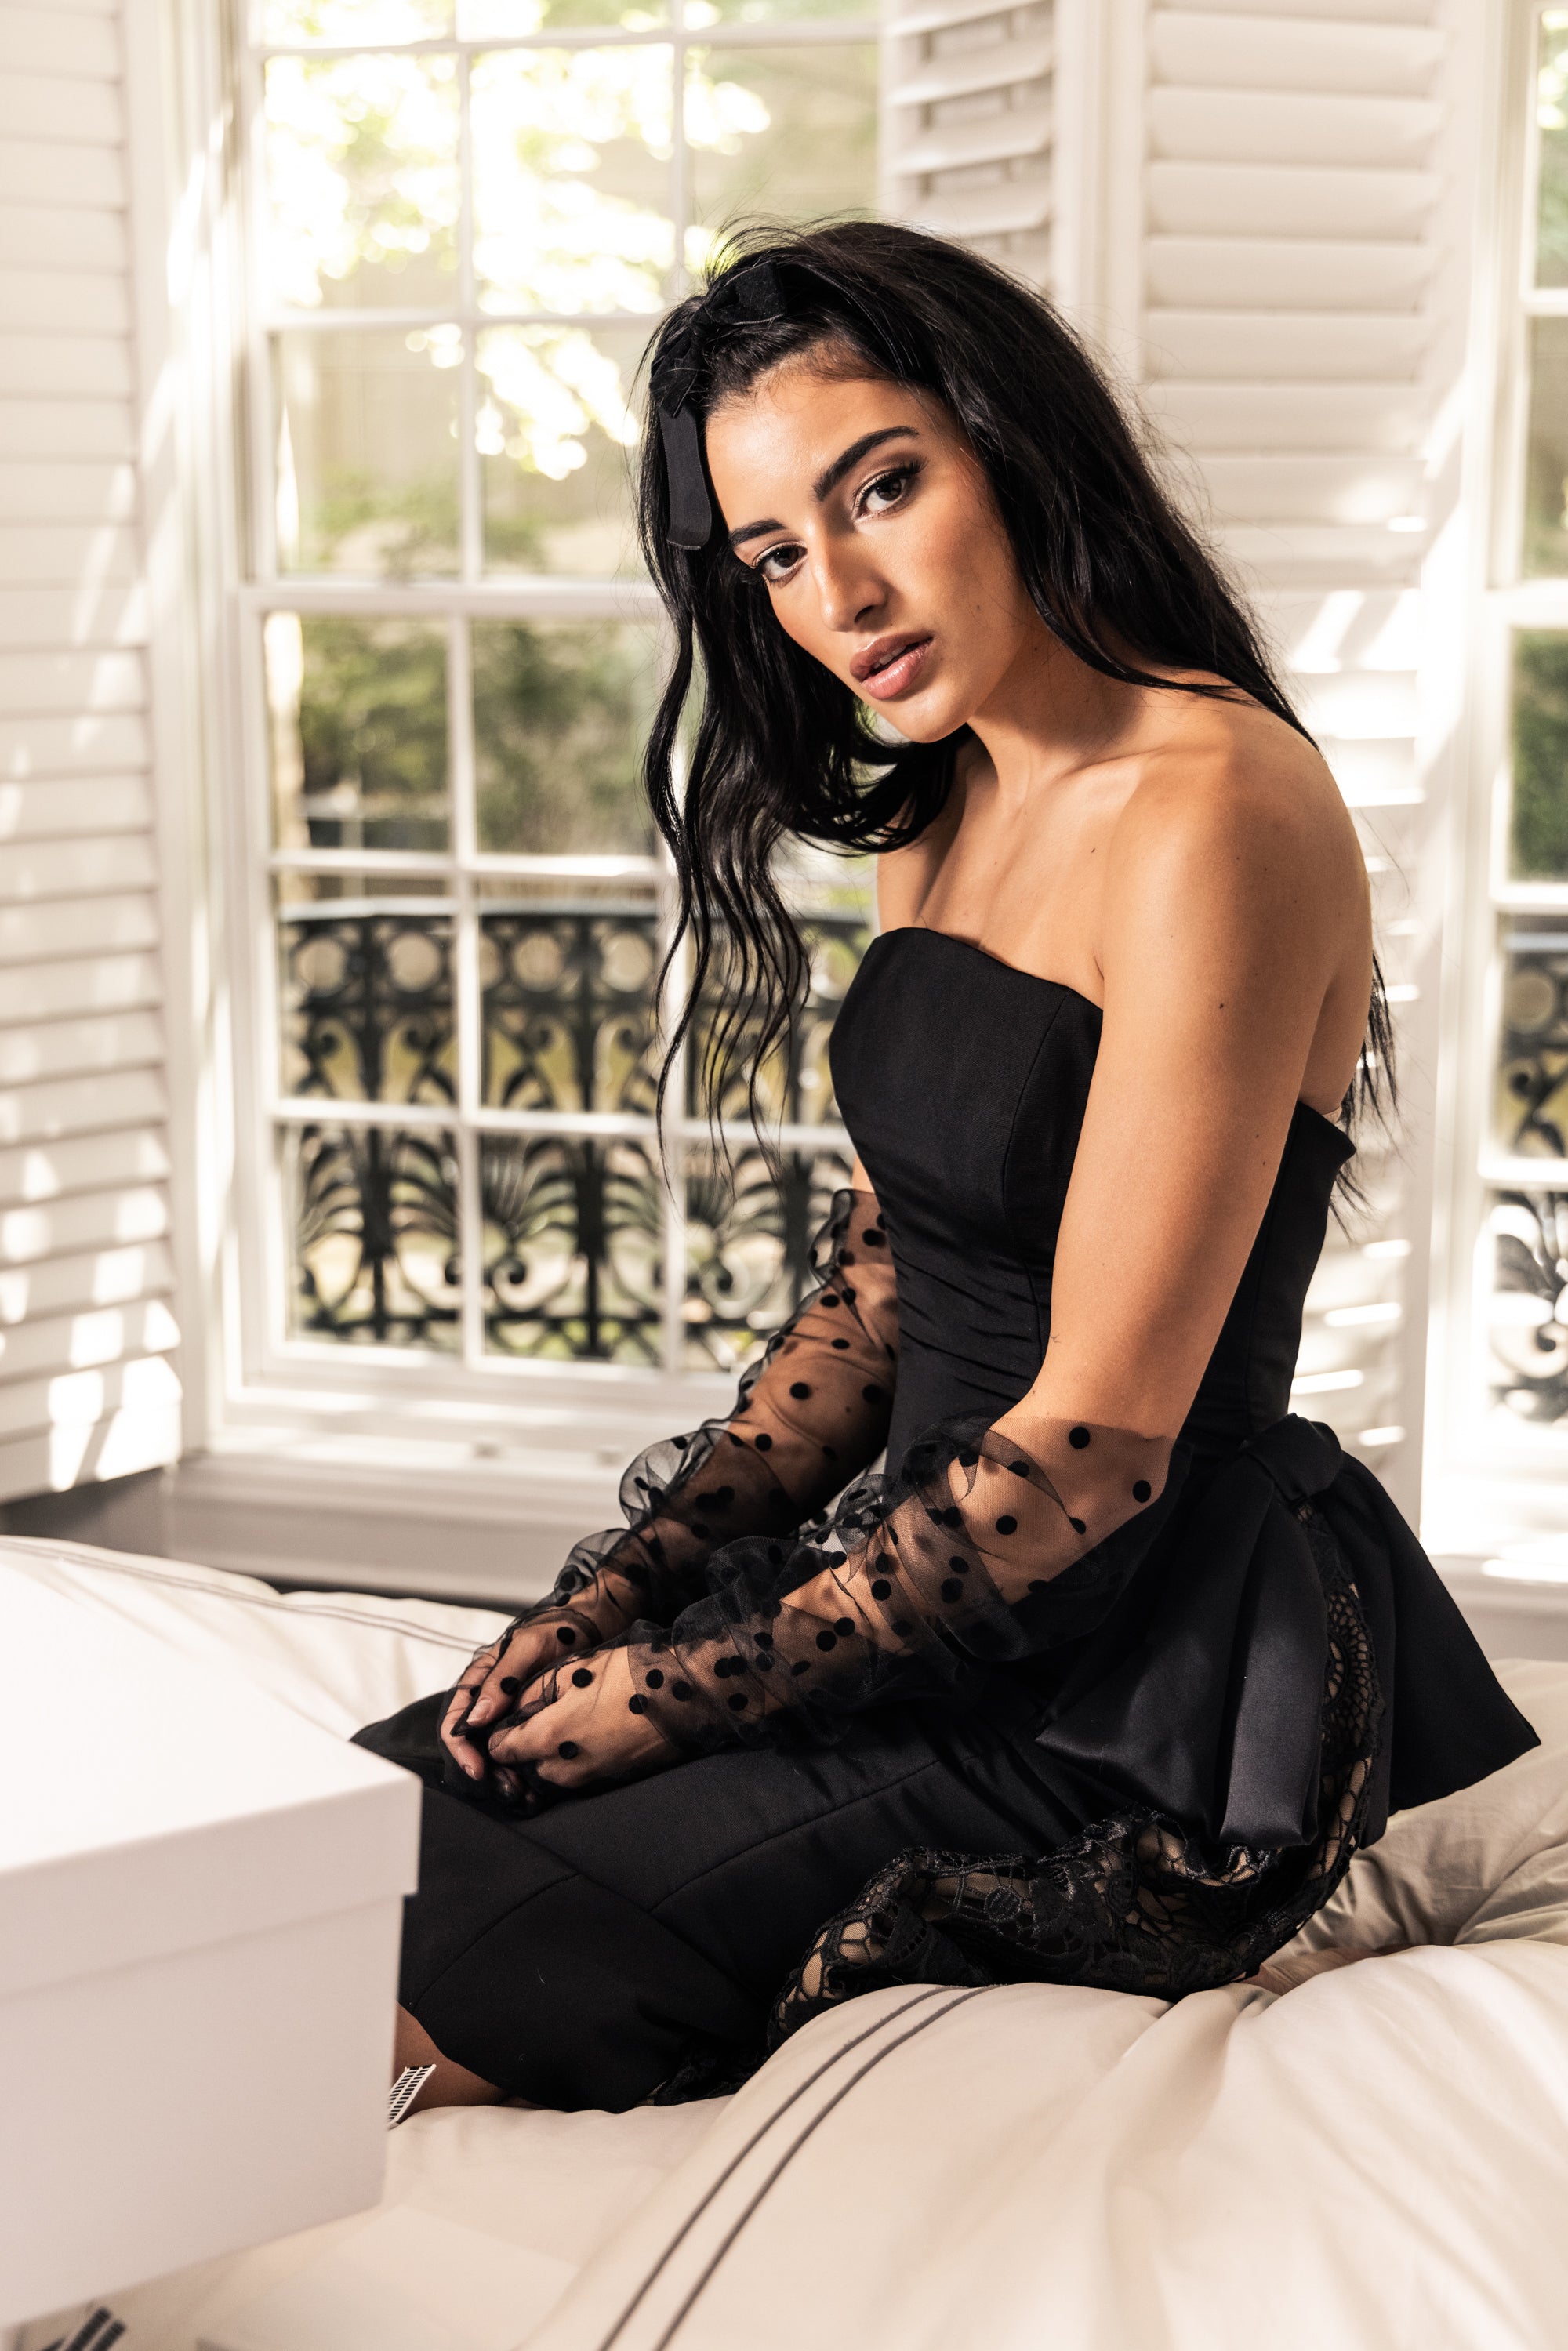 Gorgeous model in chic black embellished Sujata cocktail dress with elbow-length tulle gloves and a velvet bow in her hair kneeling on a bed with packages